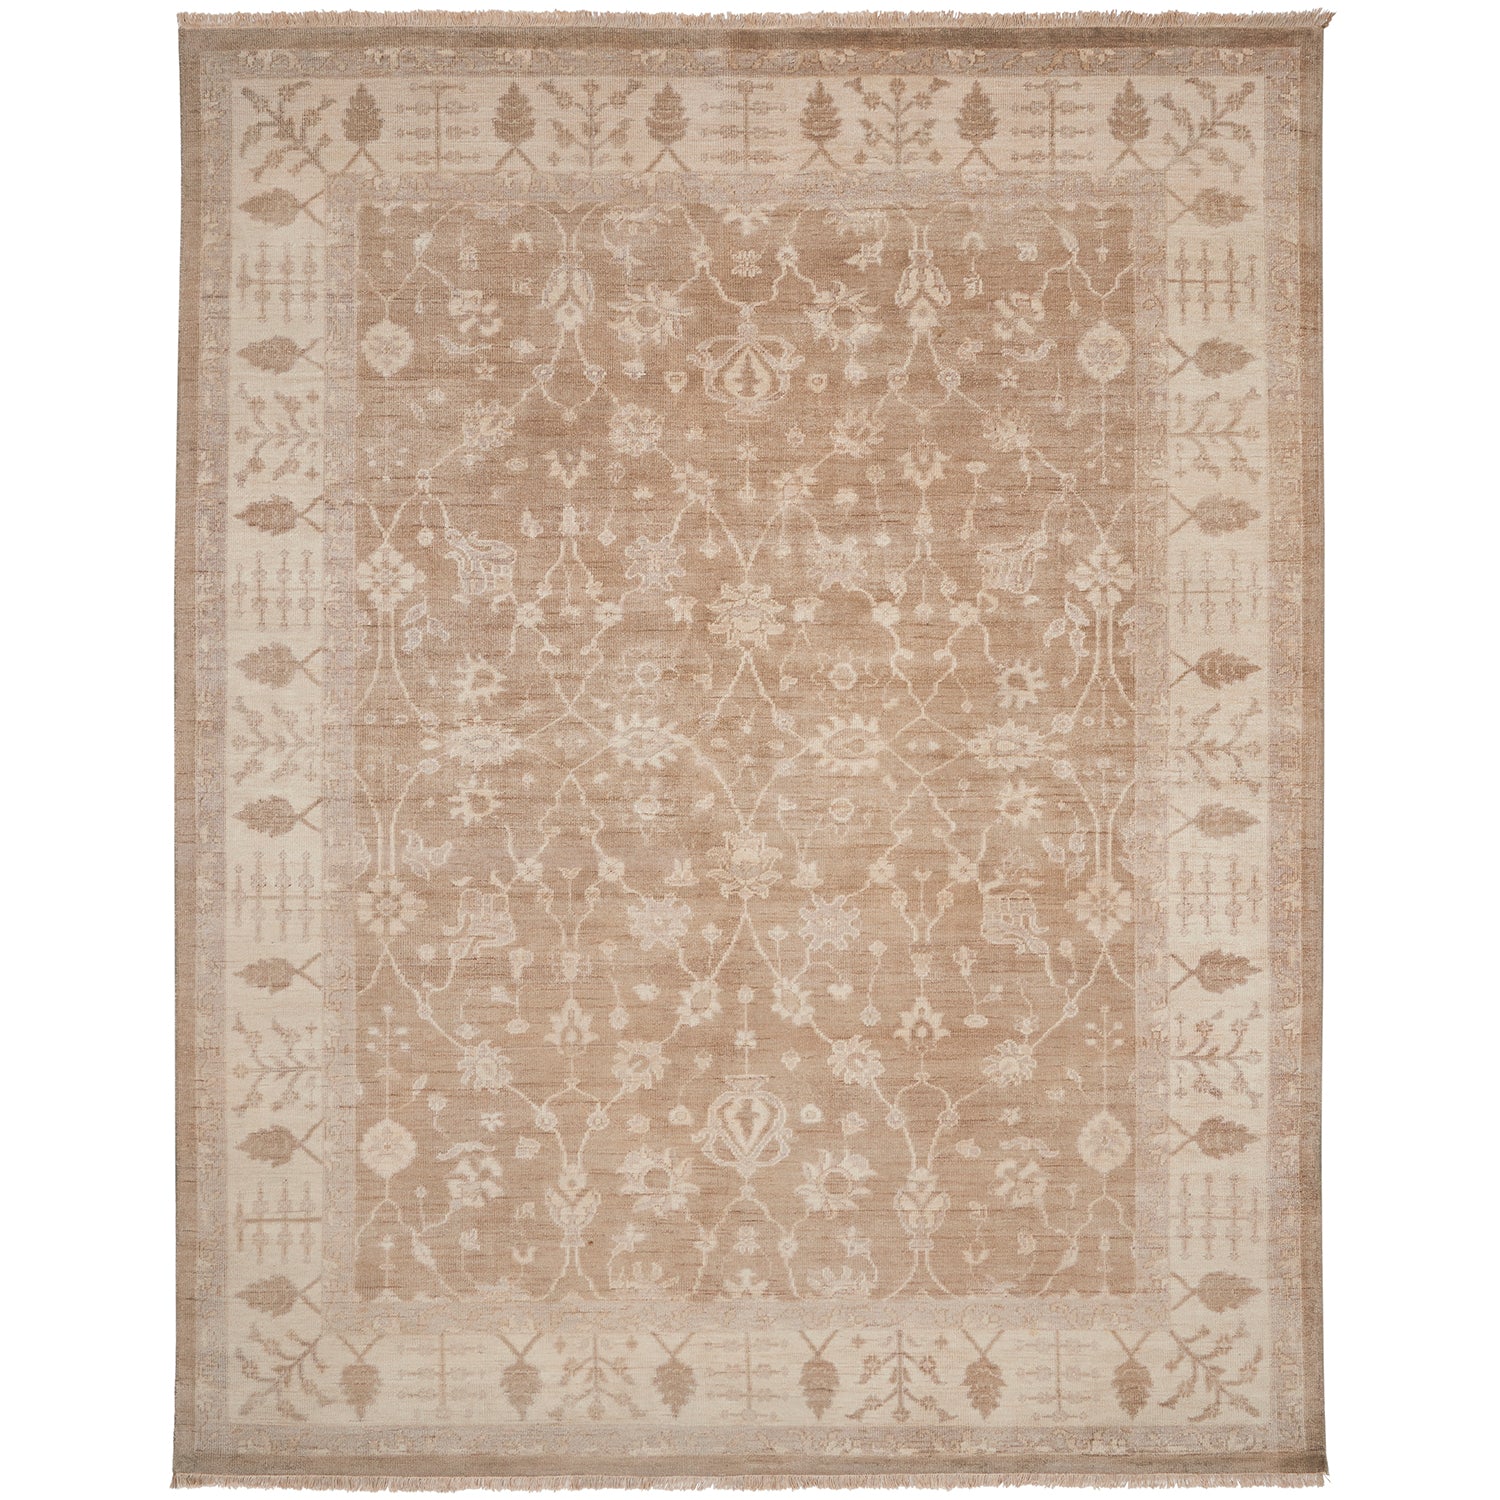 Persian Style Rug - Sand-8'6" x 11'6"